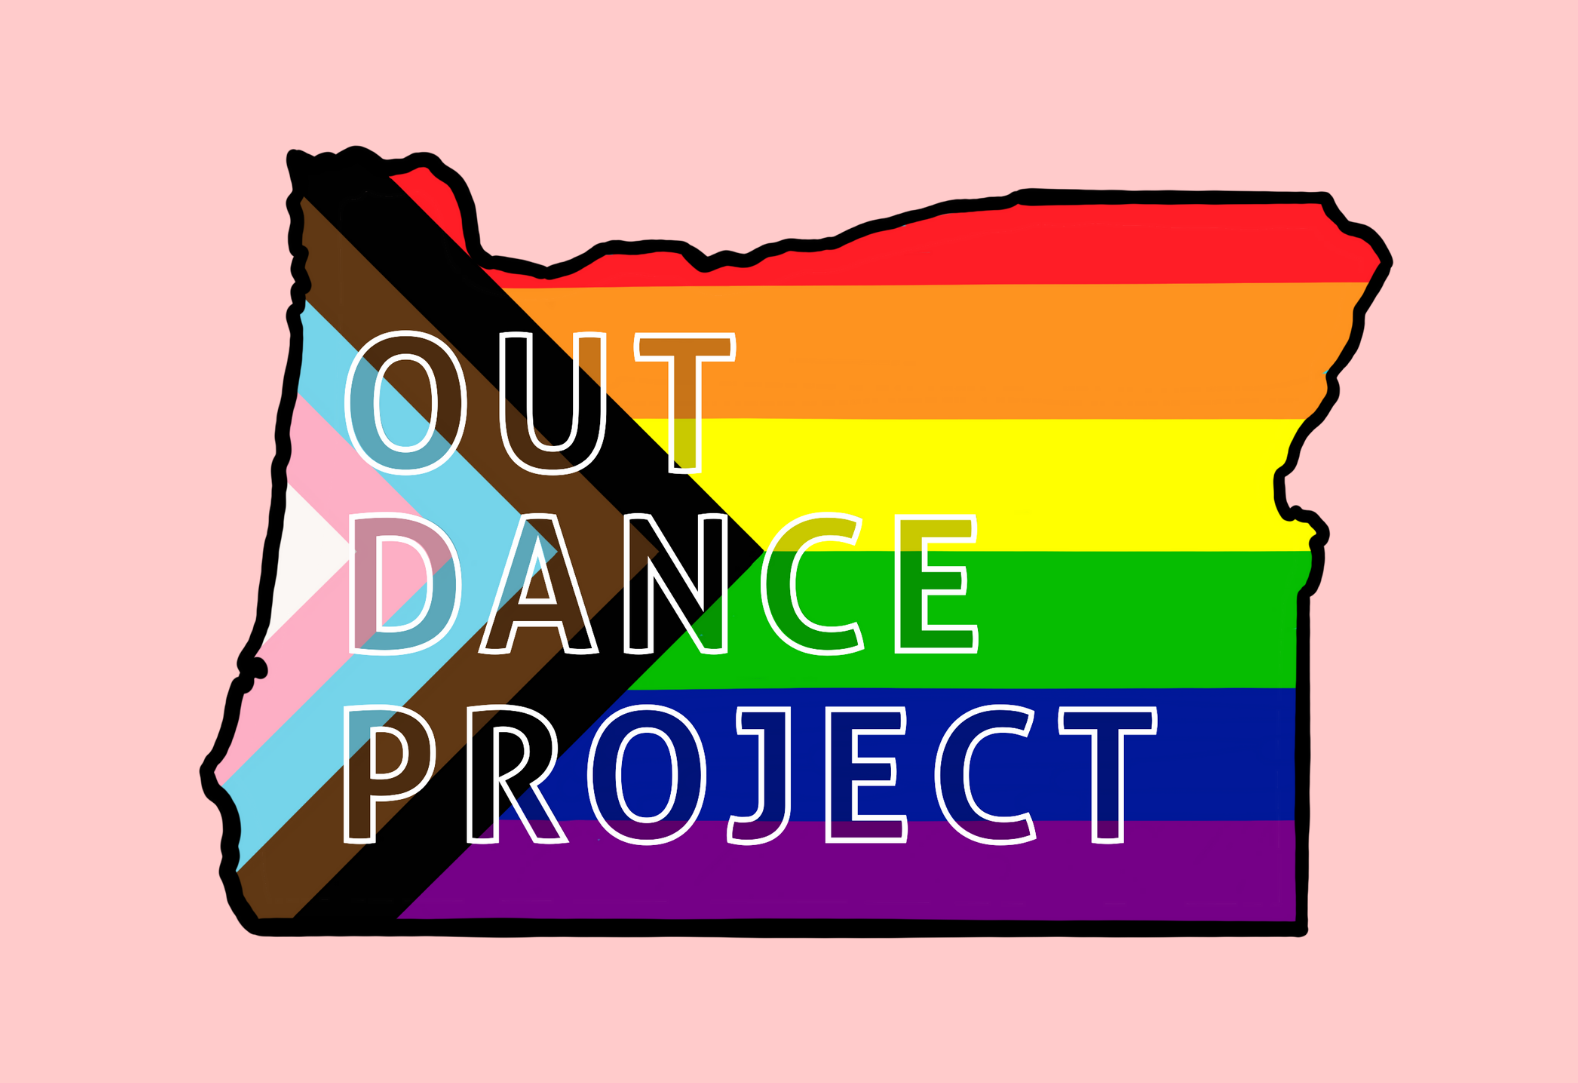 OUTDance Project logo the shape of oregon with pride flag colors